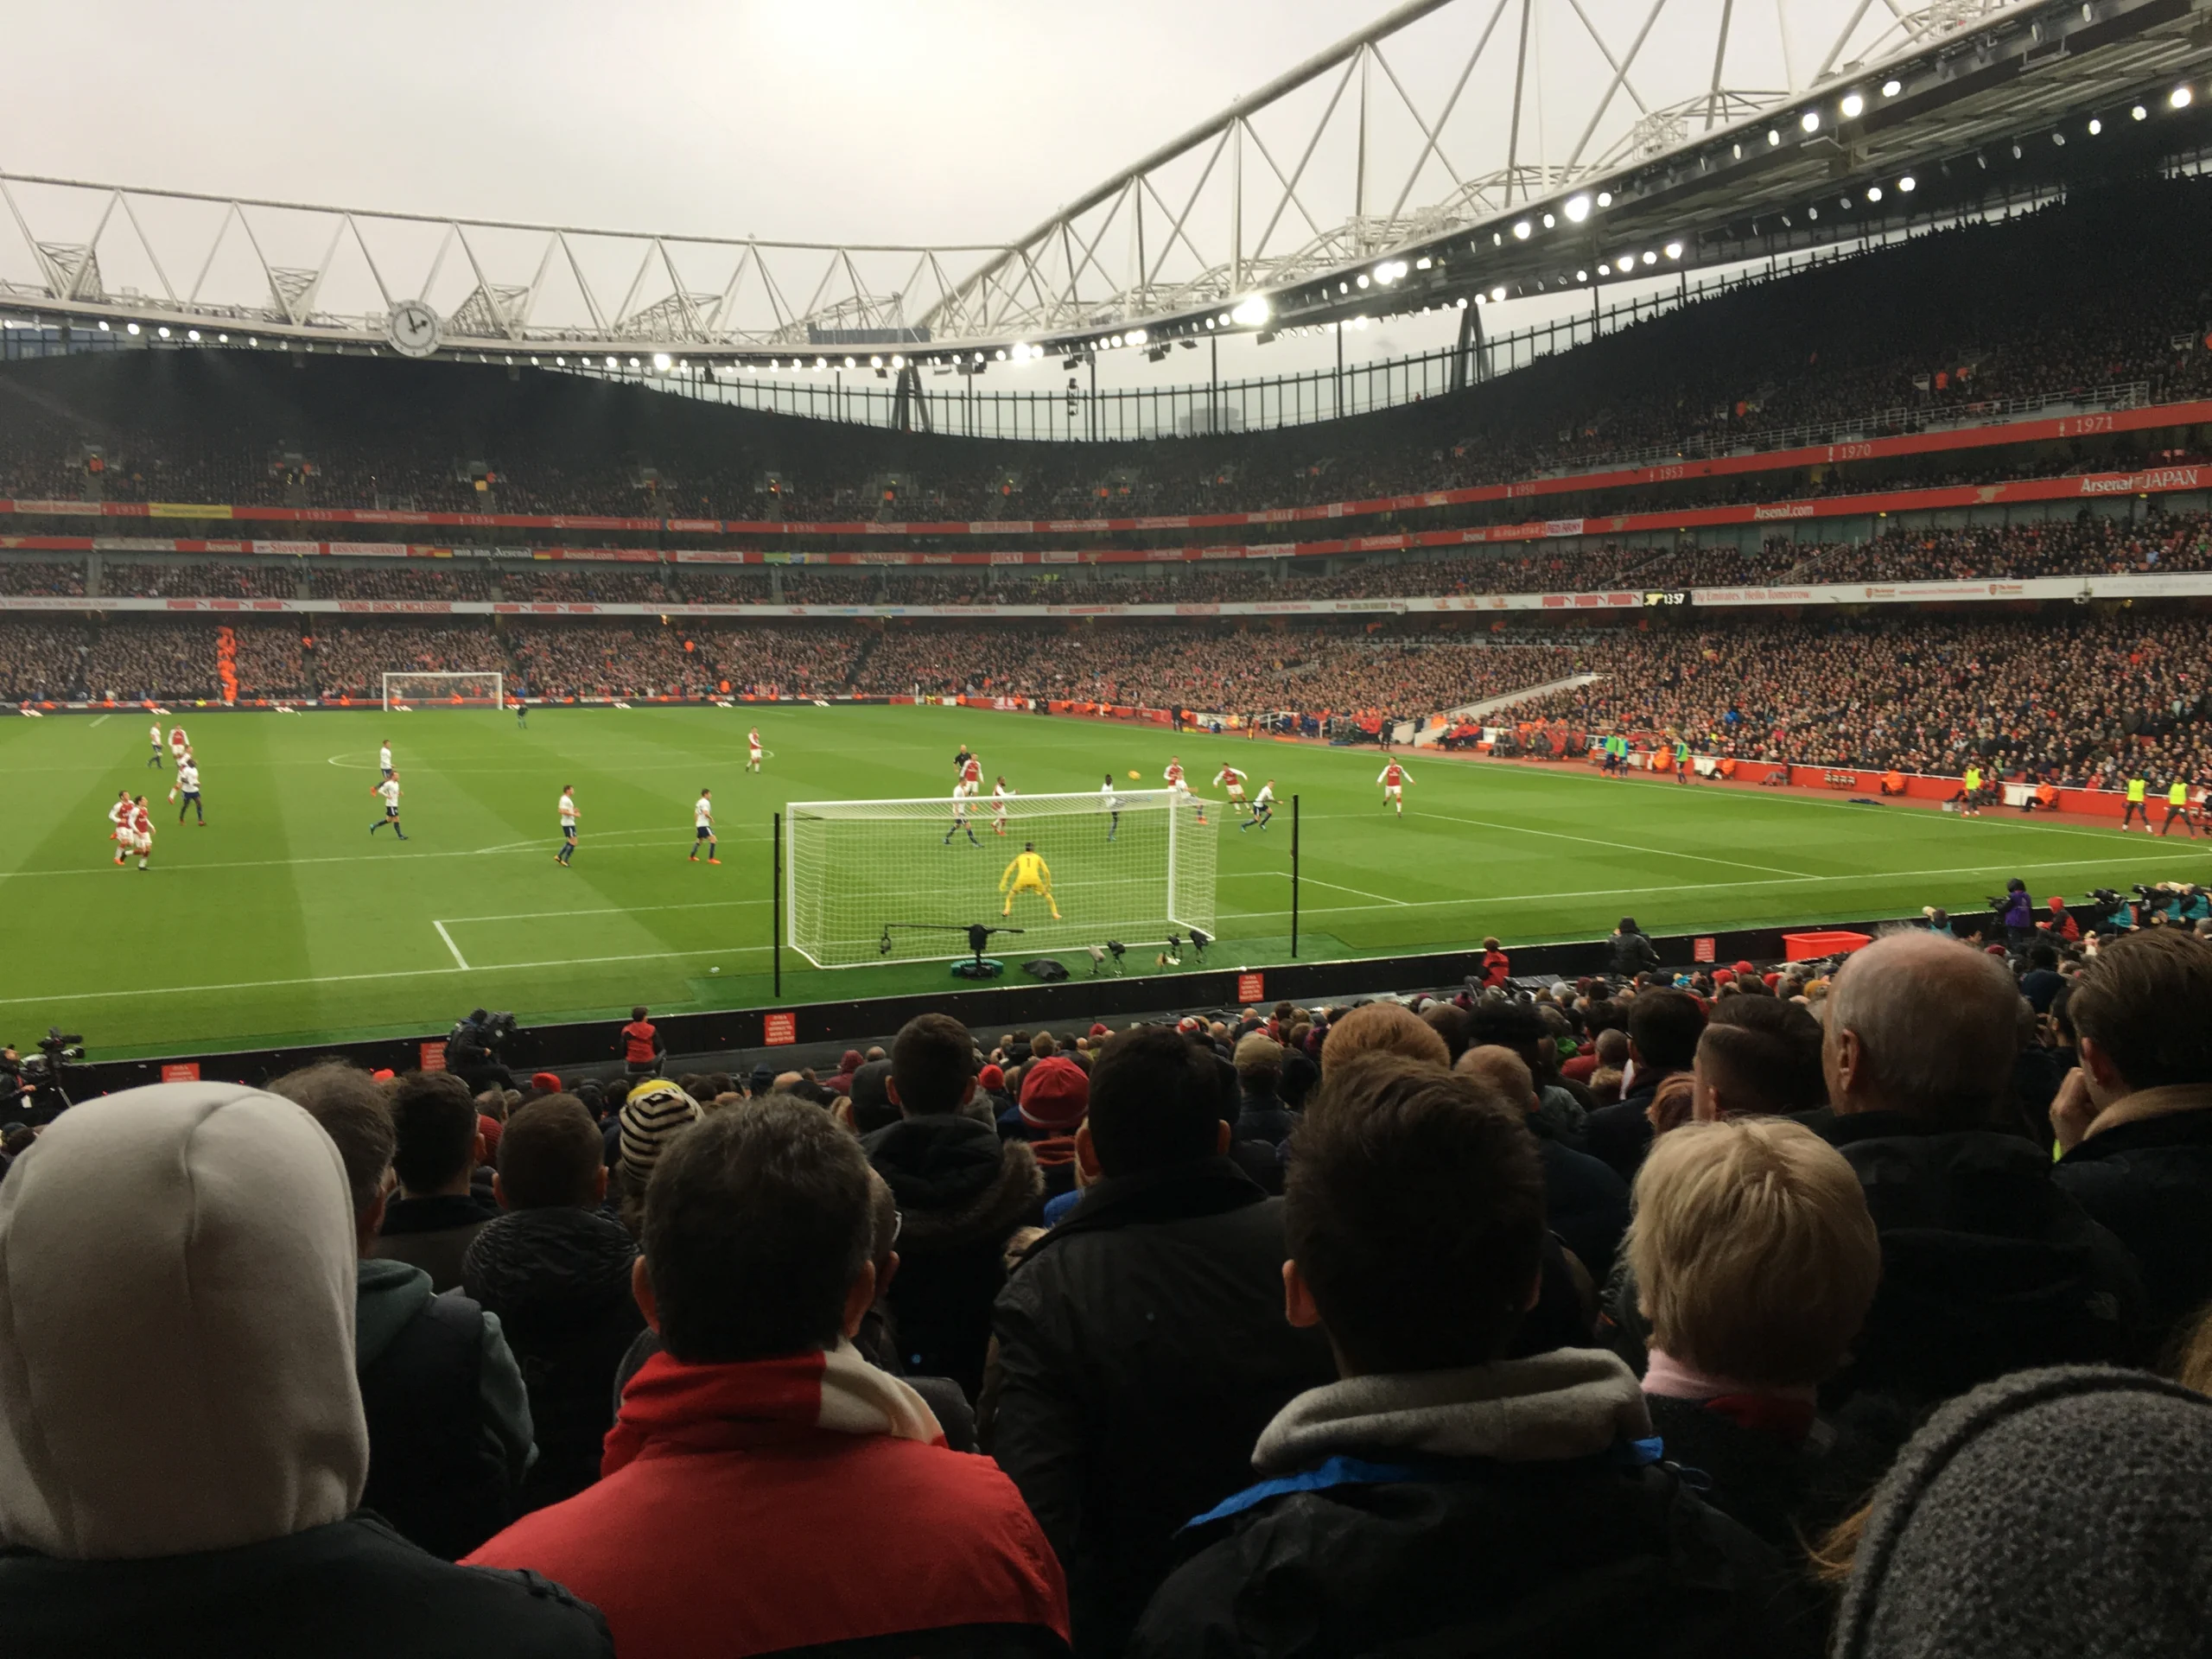 Emirates stadium North bank lower tier behind the goal view